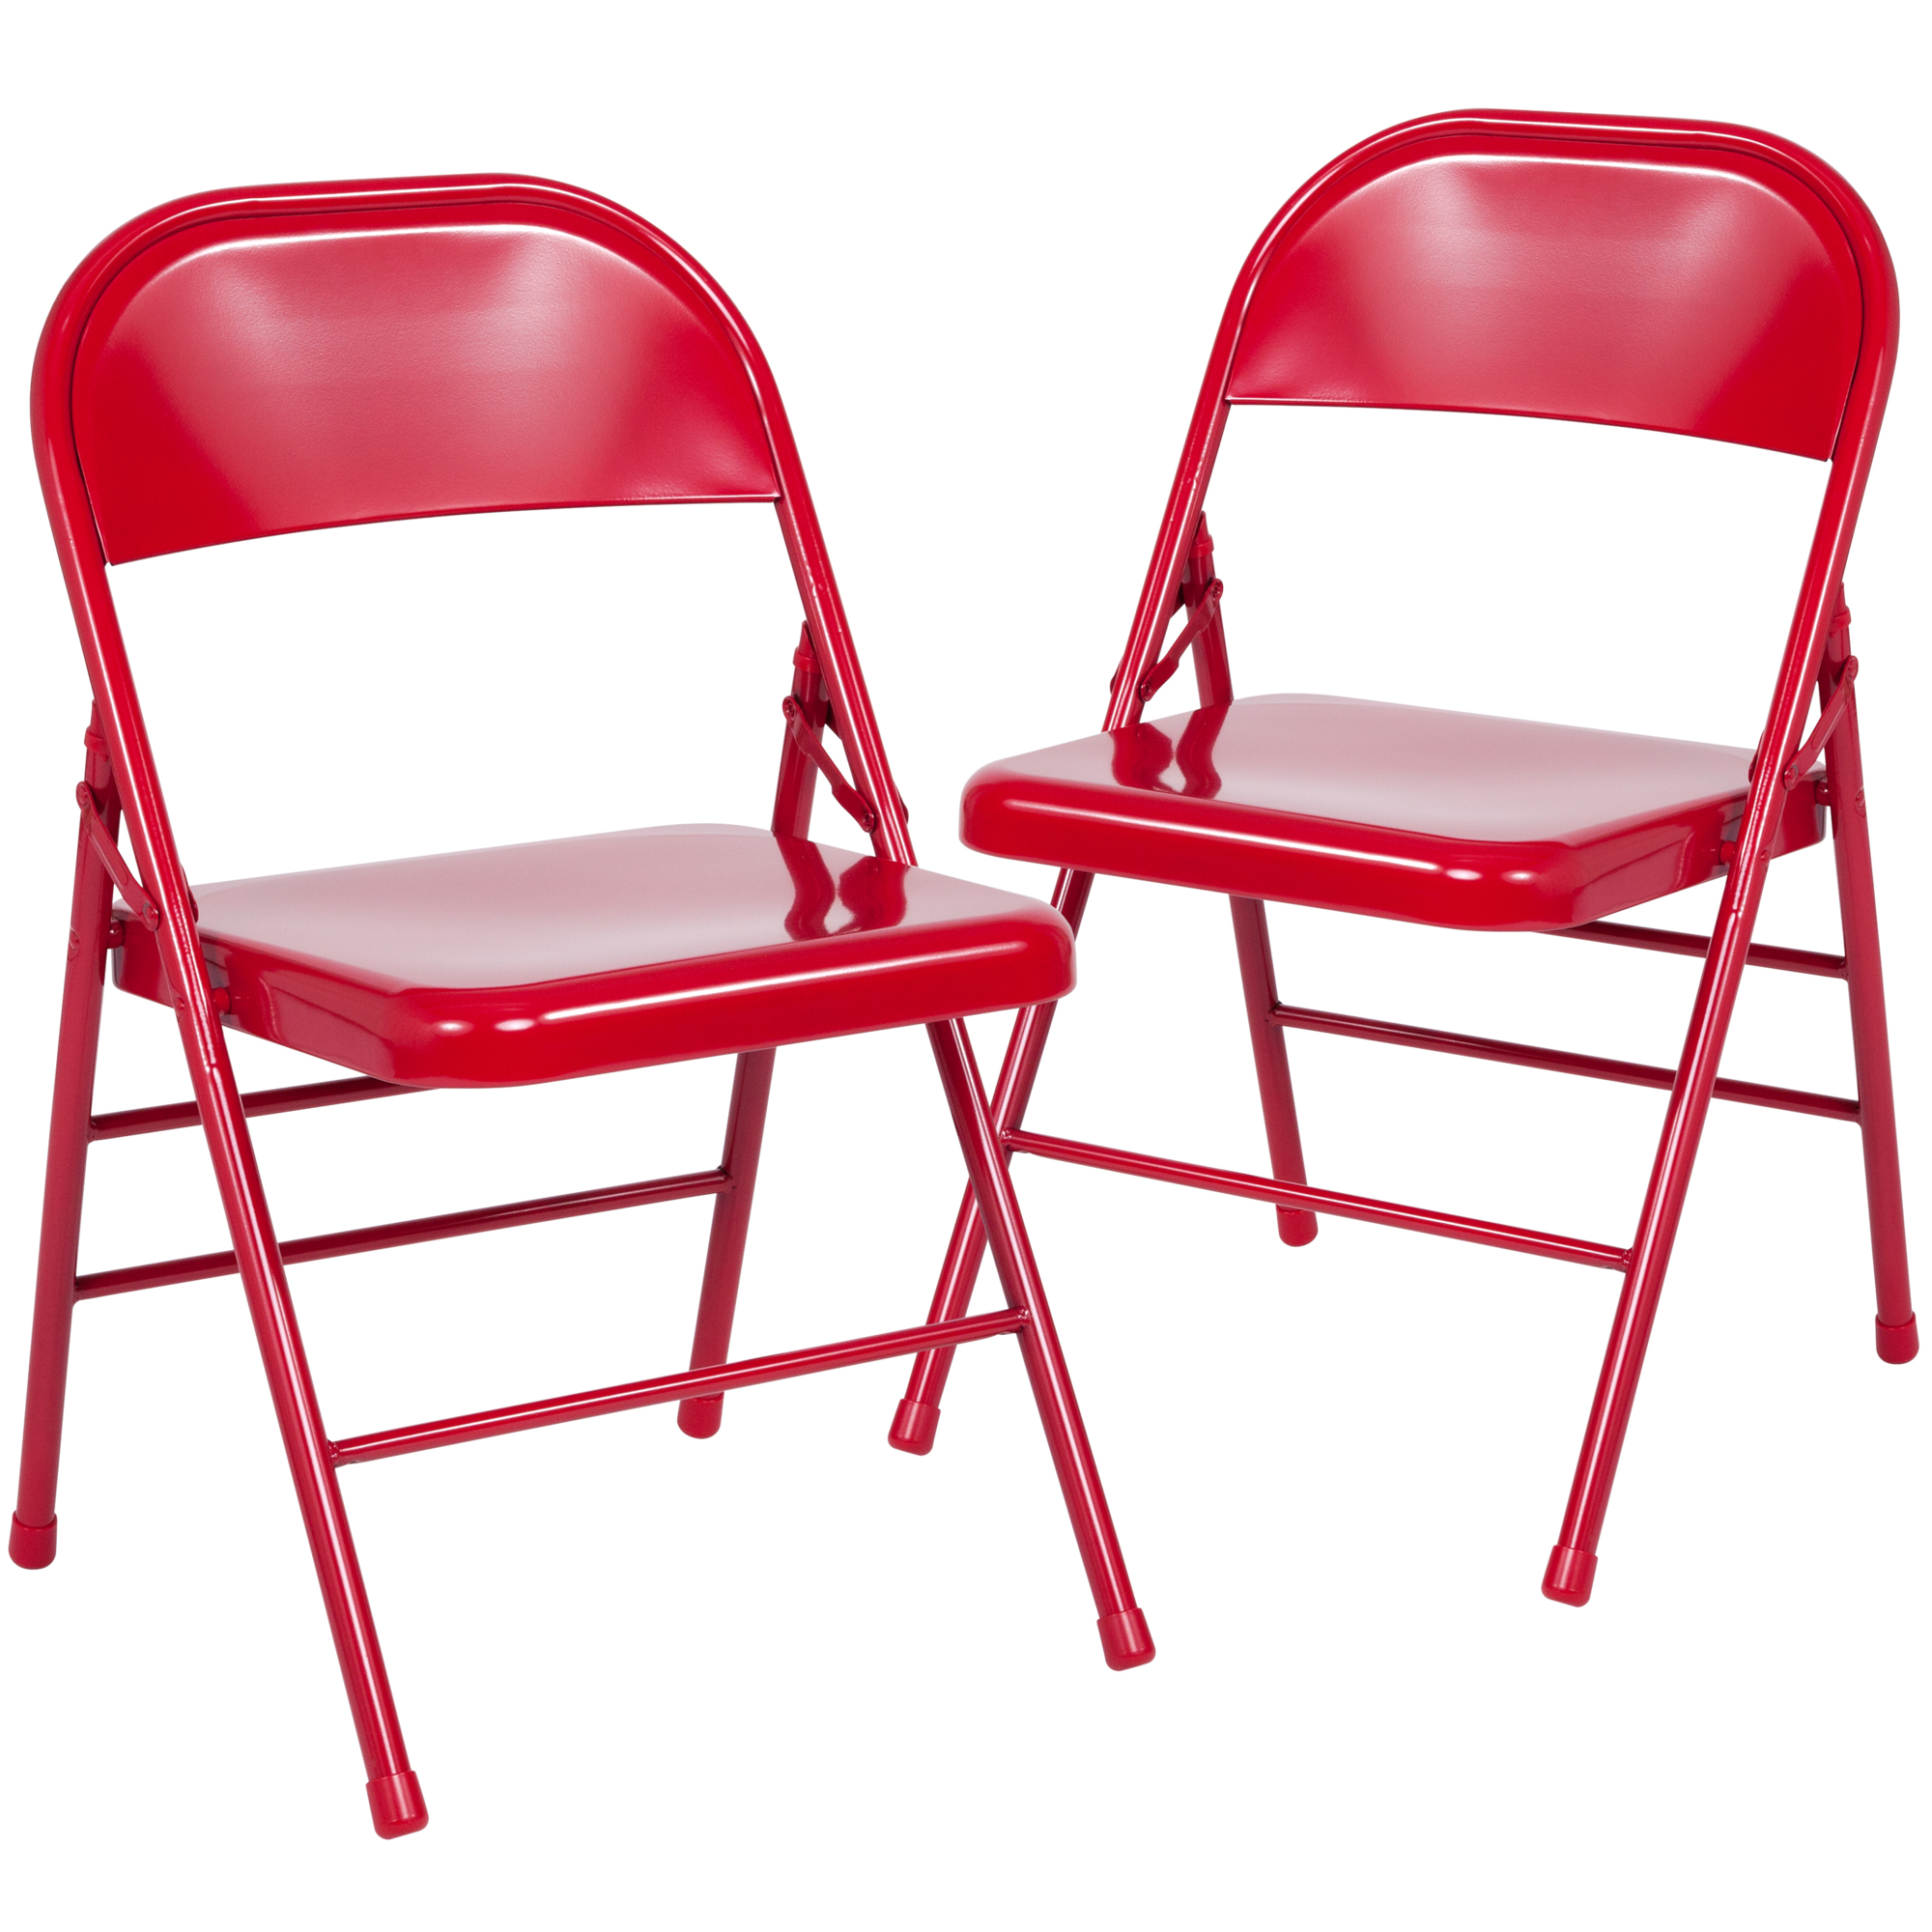 Flash Furniture, 2PK Triple Brace Double Hinged Red Folding Chair, Primary Color Red, Included (qty.) 2, Model 2HF3MC309ASRED